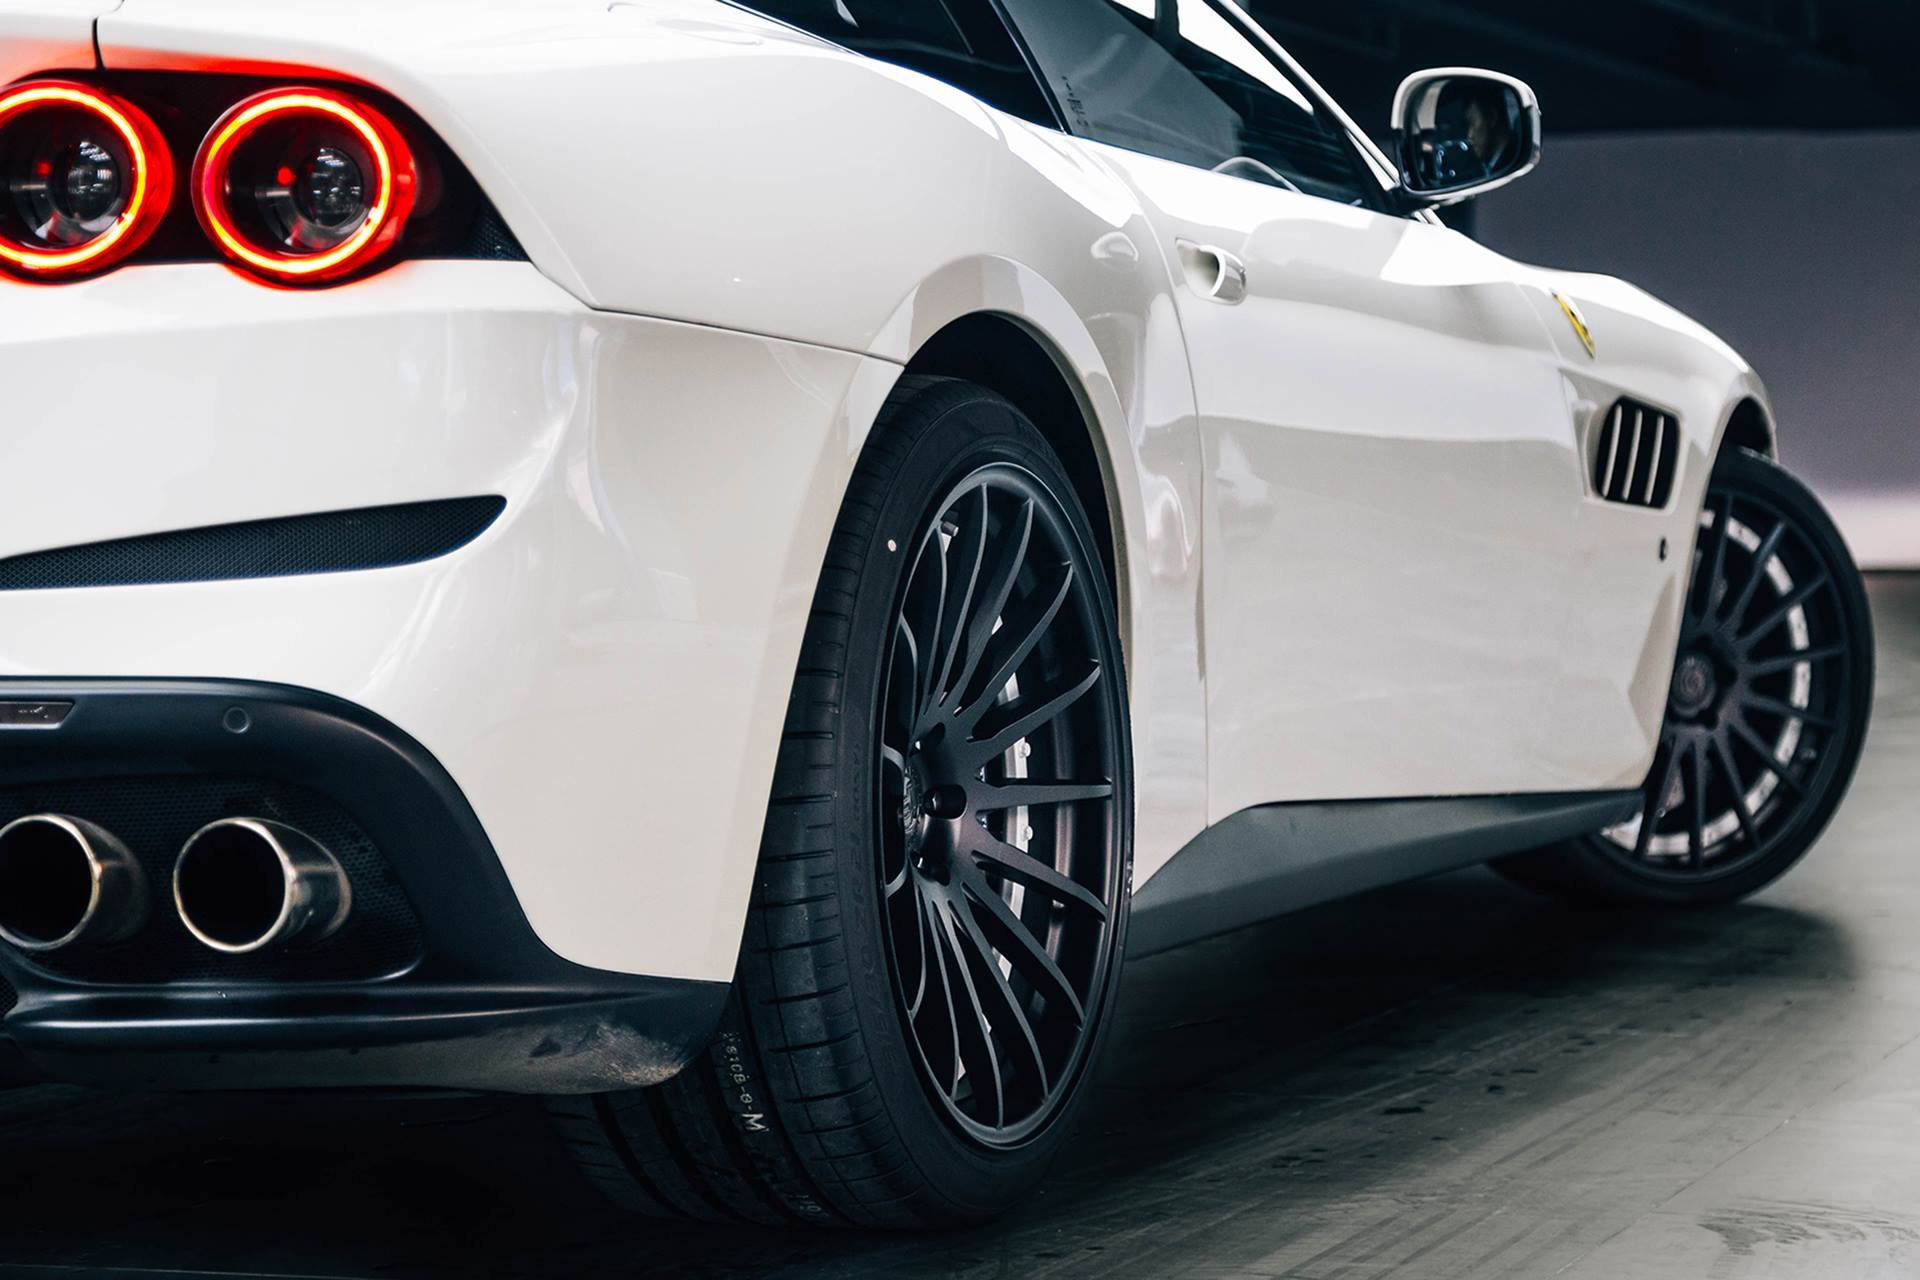 Aftermarket Taillights on White Ferrari GTC4Lusso - Photo by Forgiato